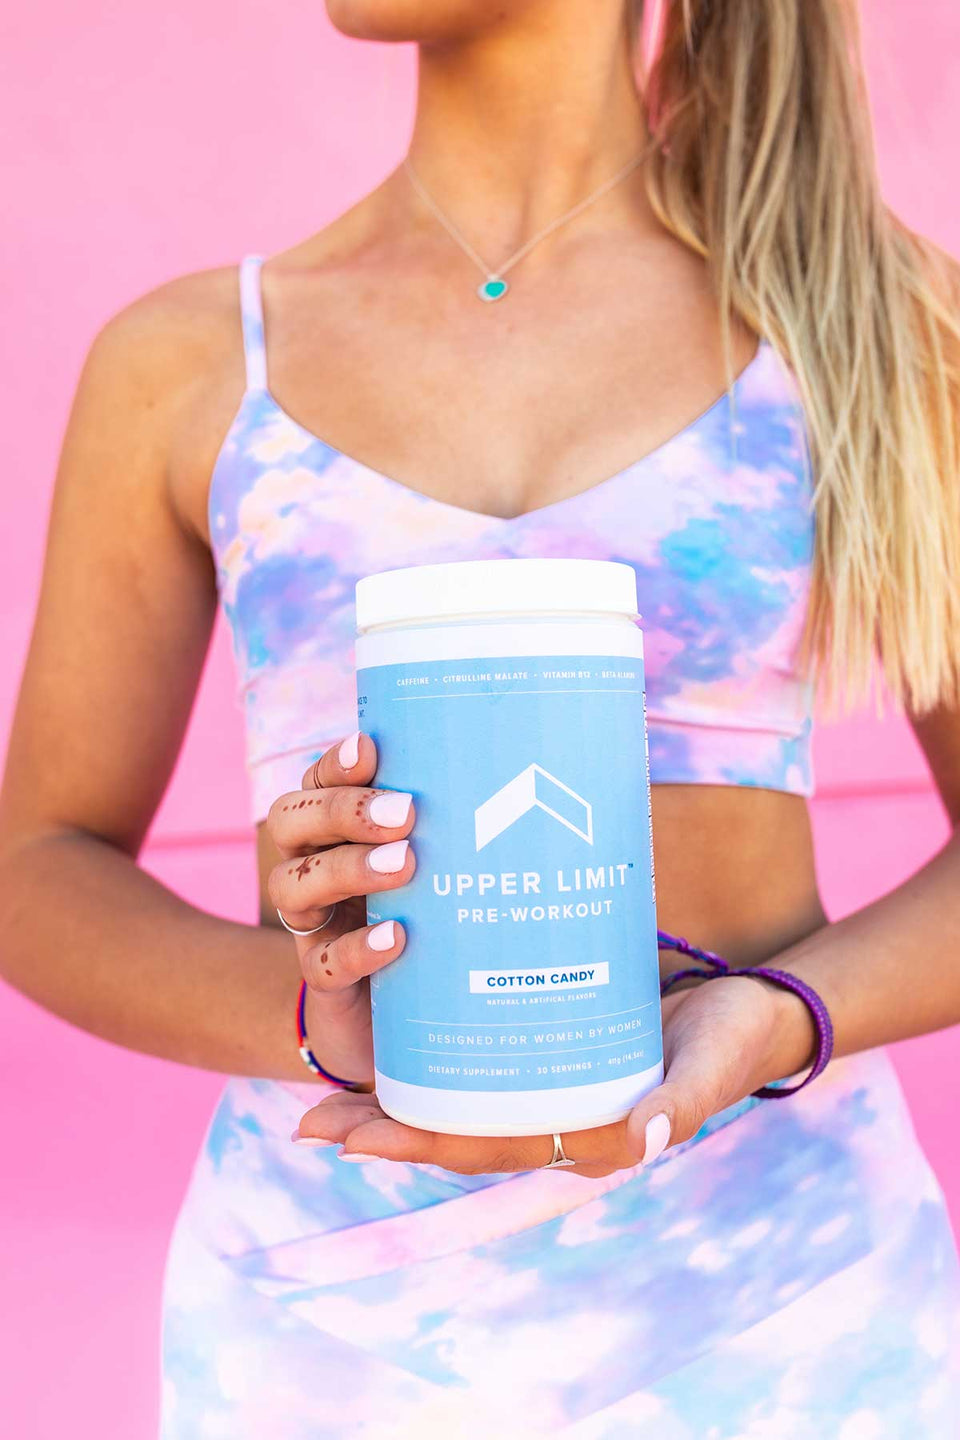 Whether your workout style is energetic & upbeat or cool, calm & focused, Upper Limit™ Supplements has a pre-workout flavor that's perfect for you. Highly rated for flavor, taste & performance, our pre-workout drink mixes are the best energy drinks for women!